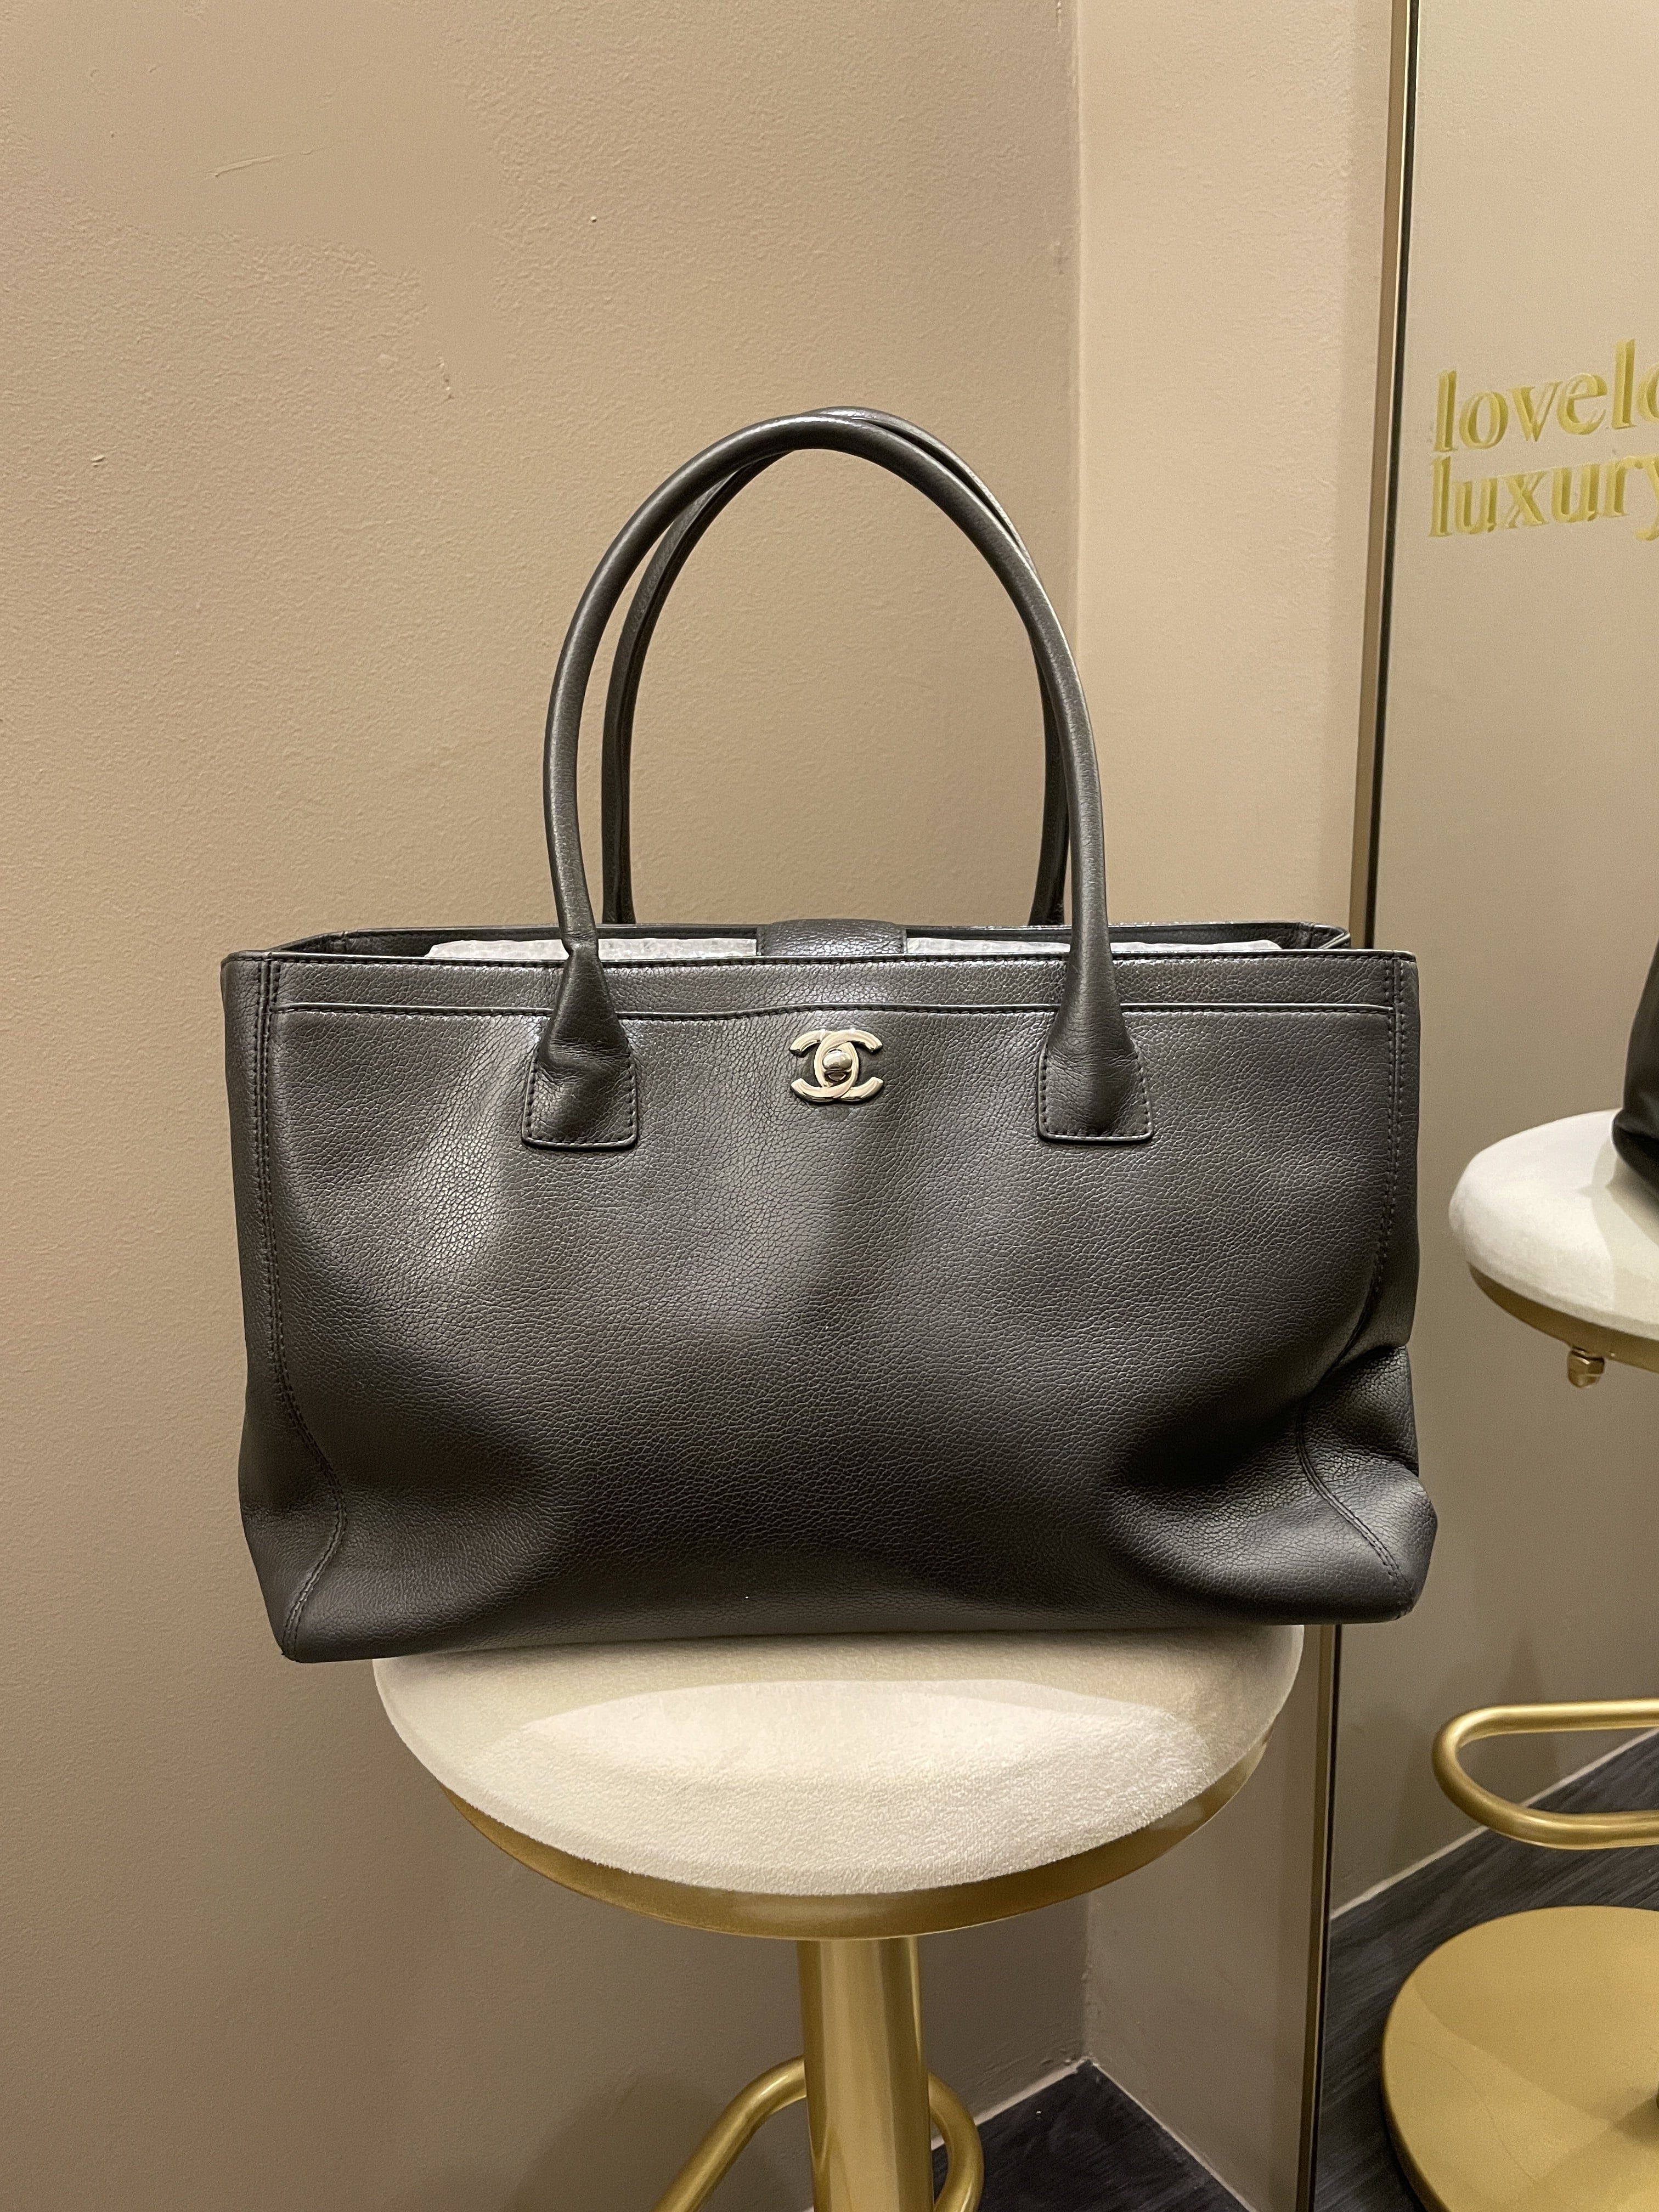 Chanel Grey Large Neo Executive Tote